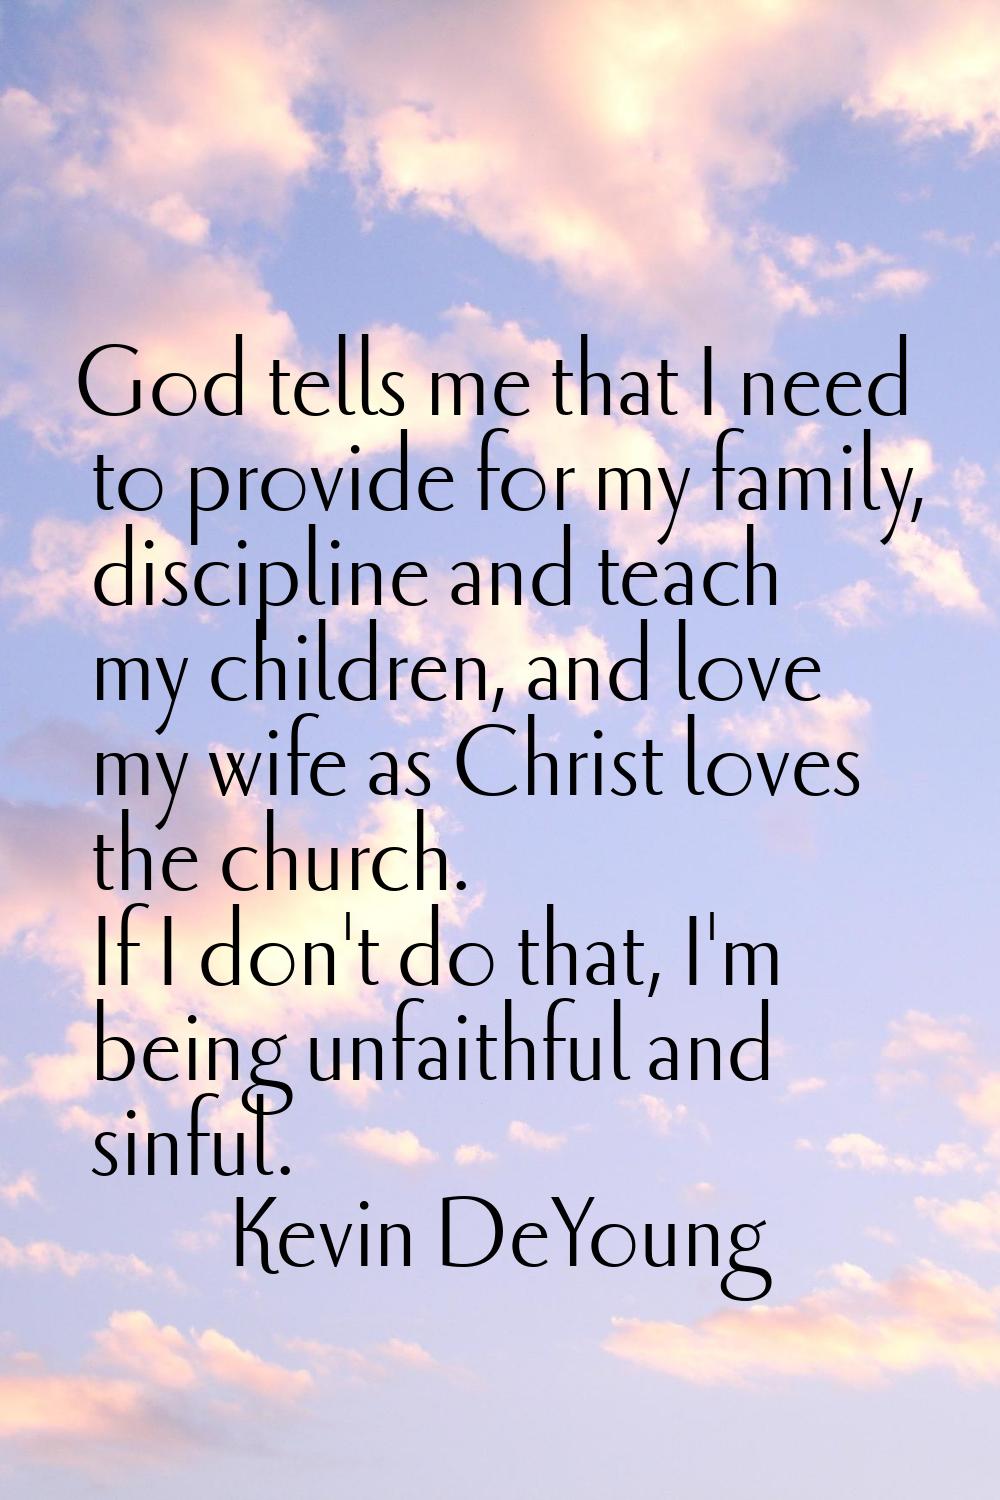 God tells me that I need to provide for my family, discipline and teach my children, and love my wi